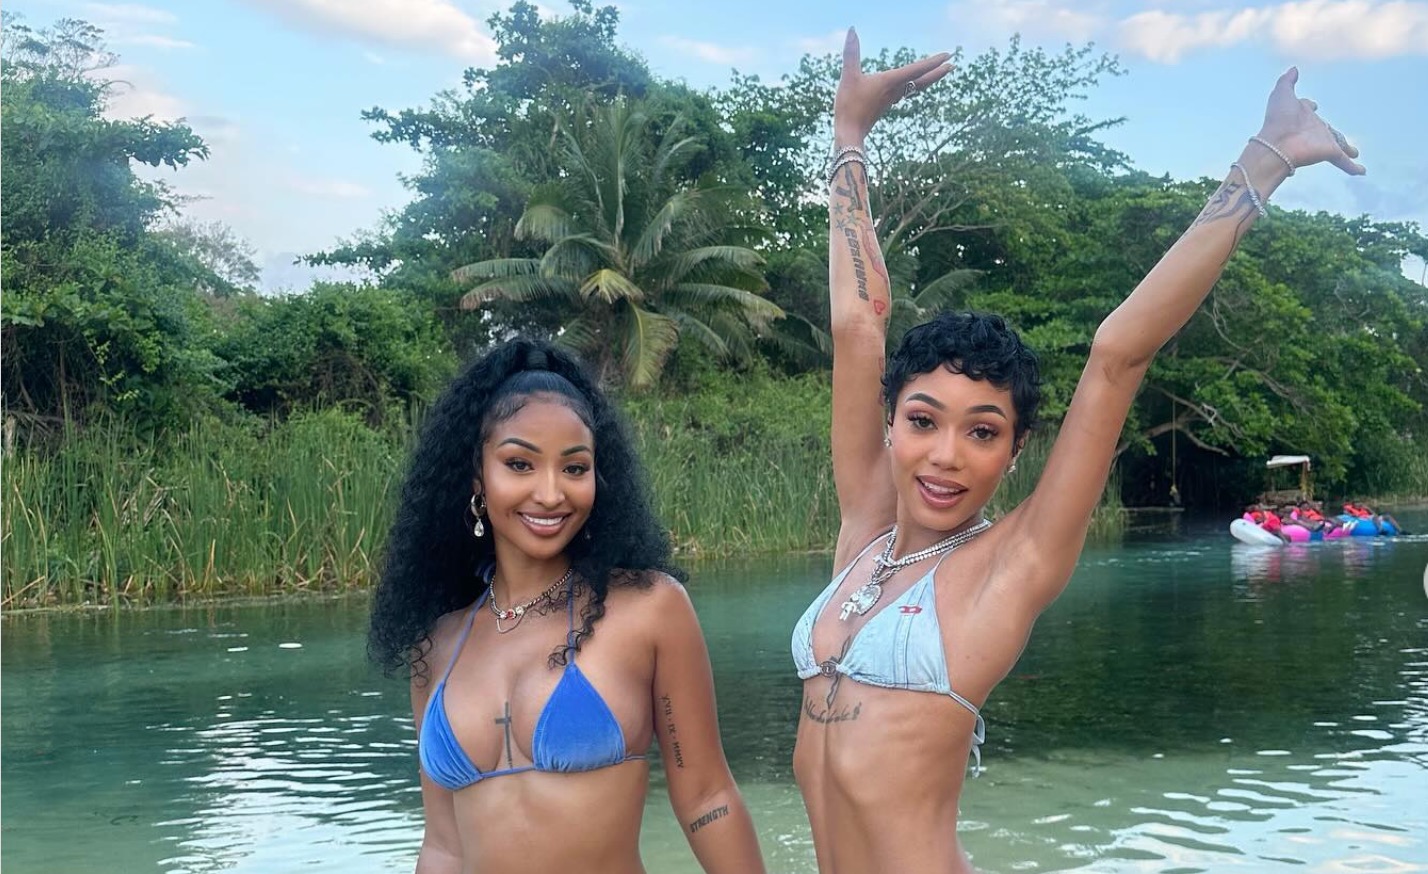 Shenseea Brought Coi Leray to a Beach in Jamaica - See Photos and Video